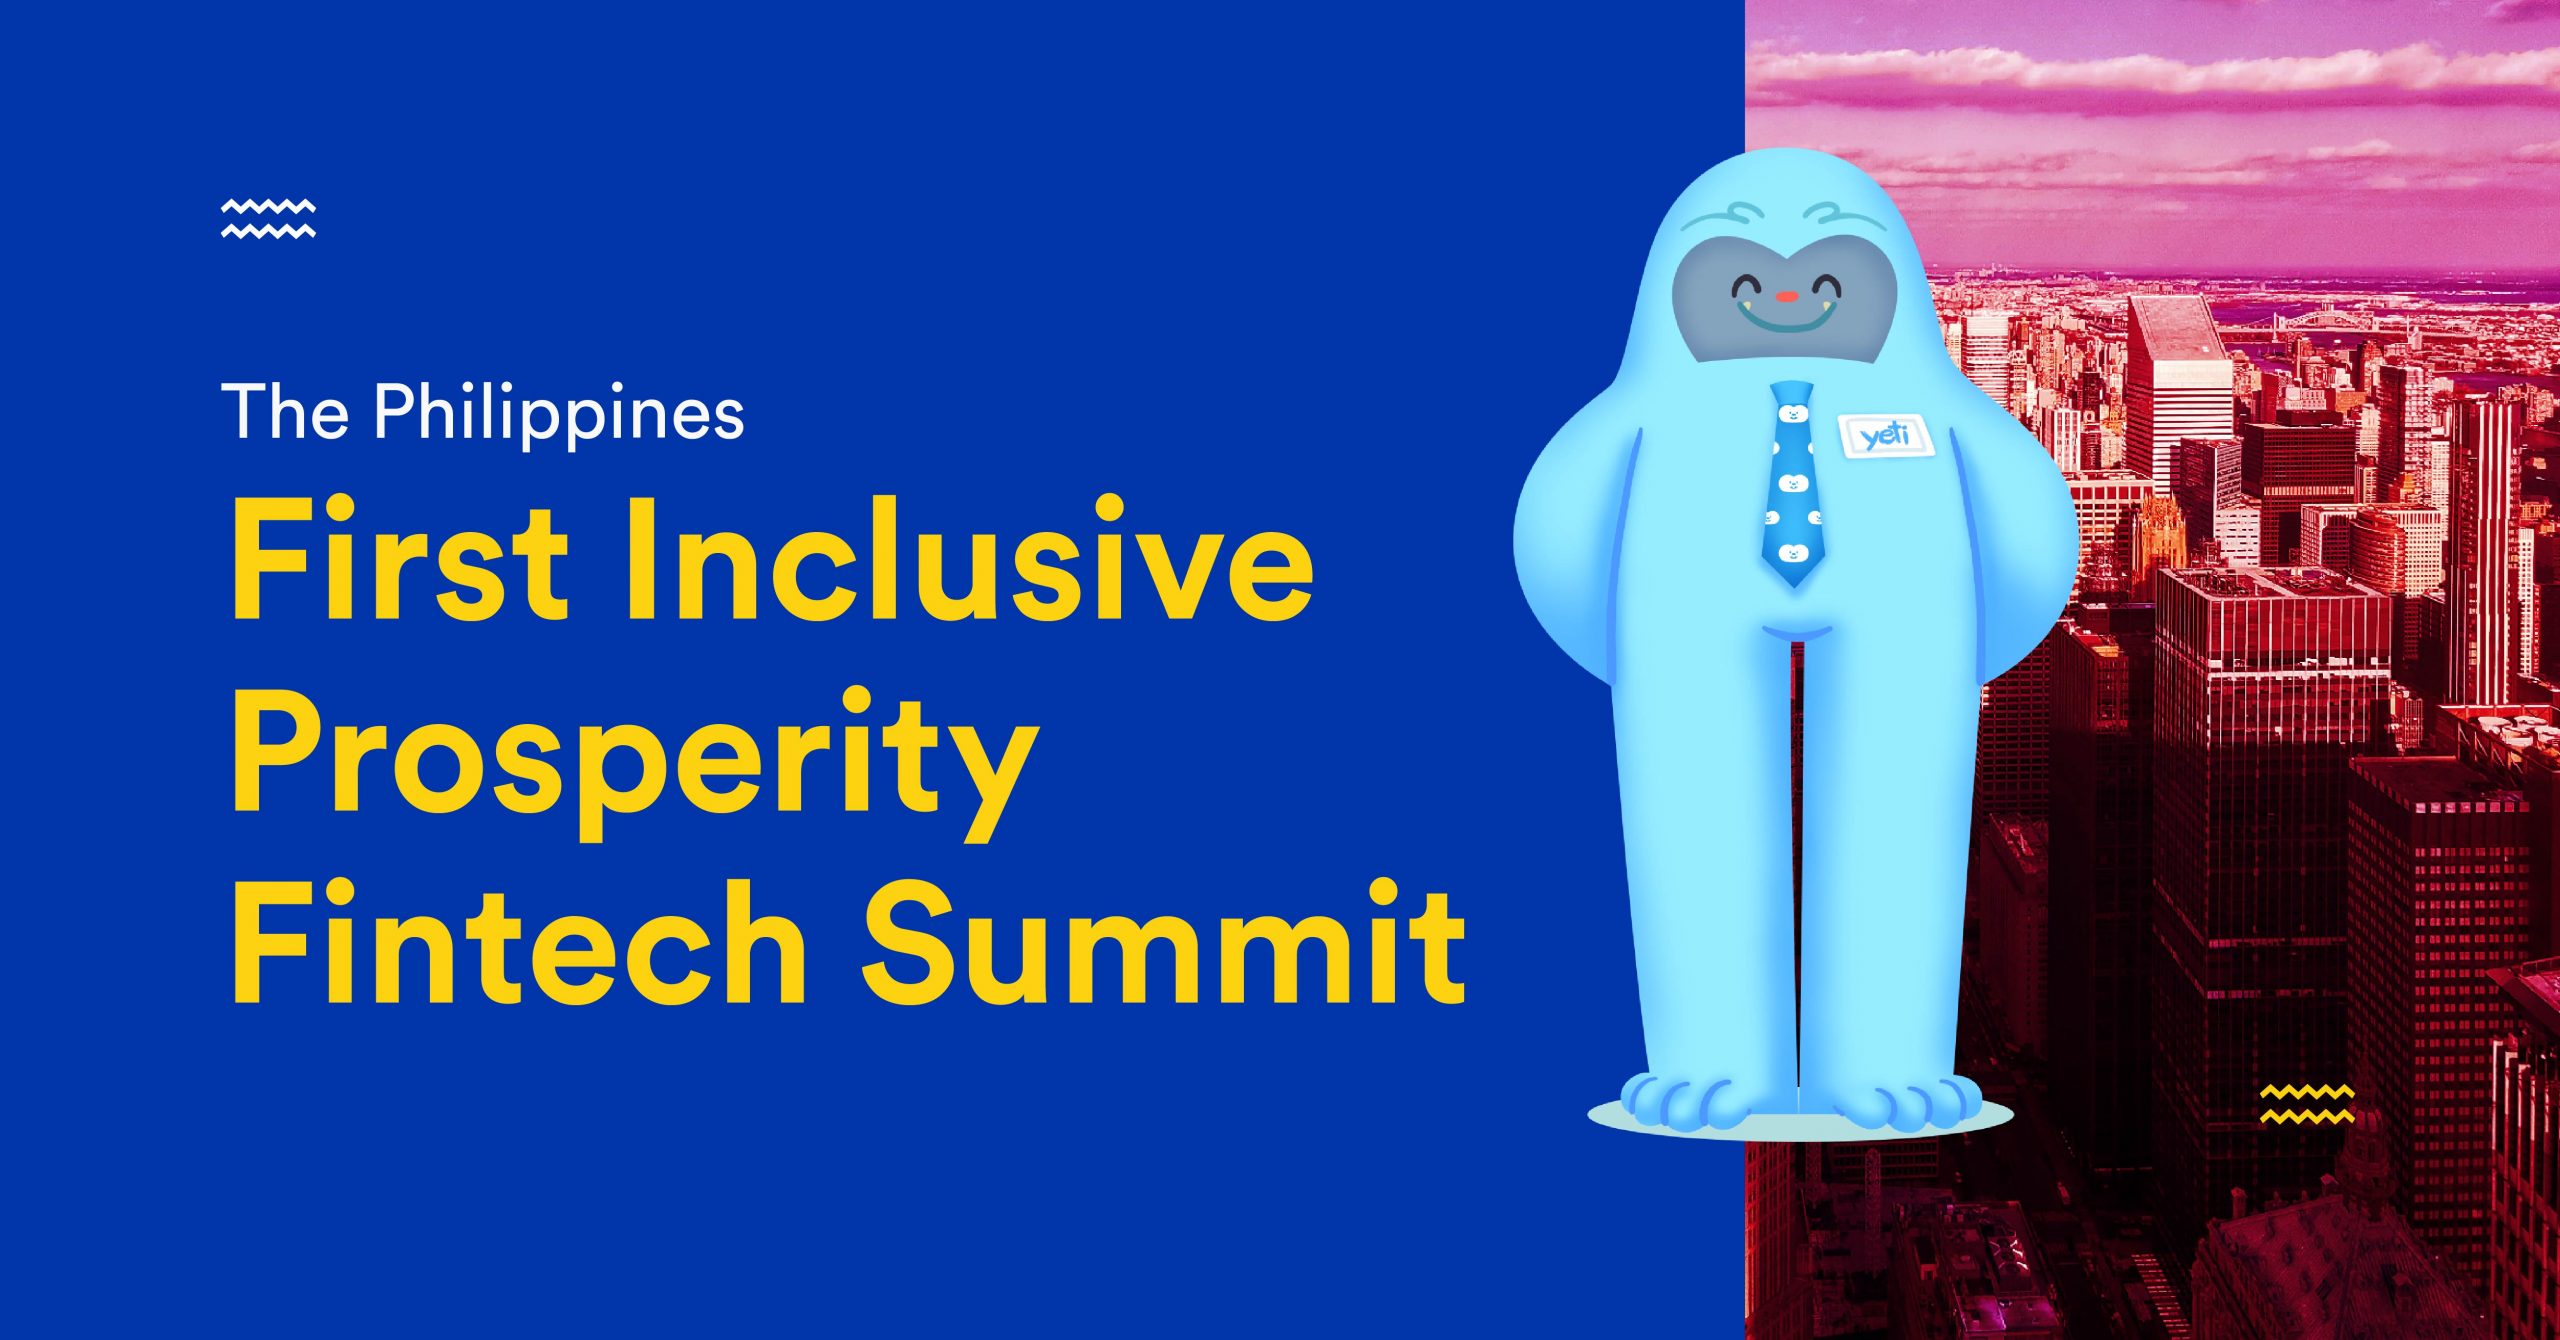 The Philippines First Inclusive Prosperity Fintech Summit